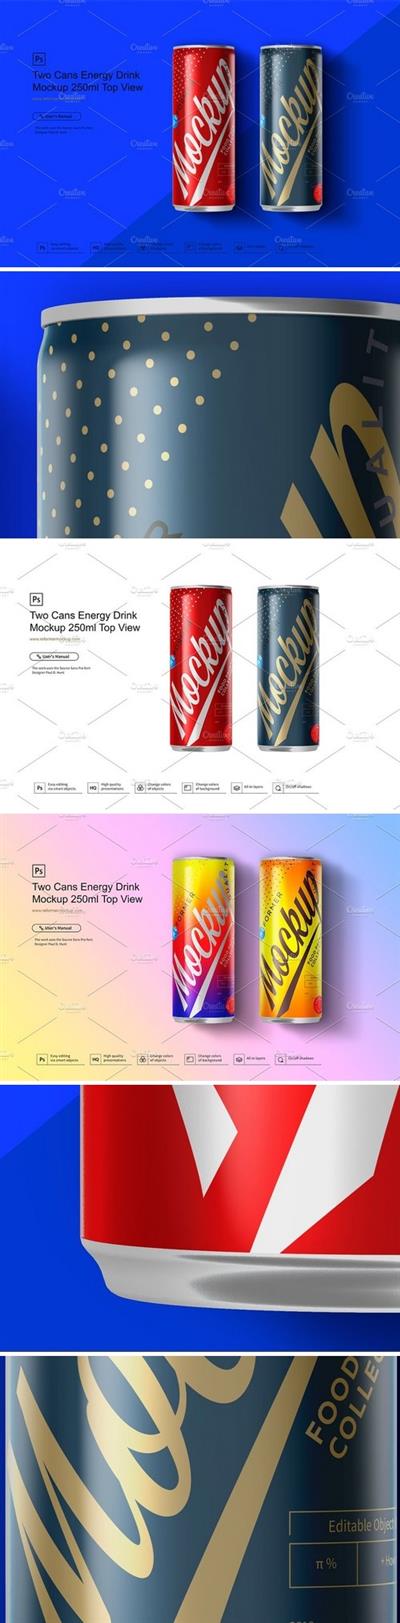 CreativeMarket - Two Cans Energy Drink Mockup 250ml T 3580775